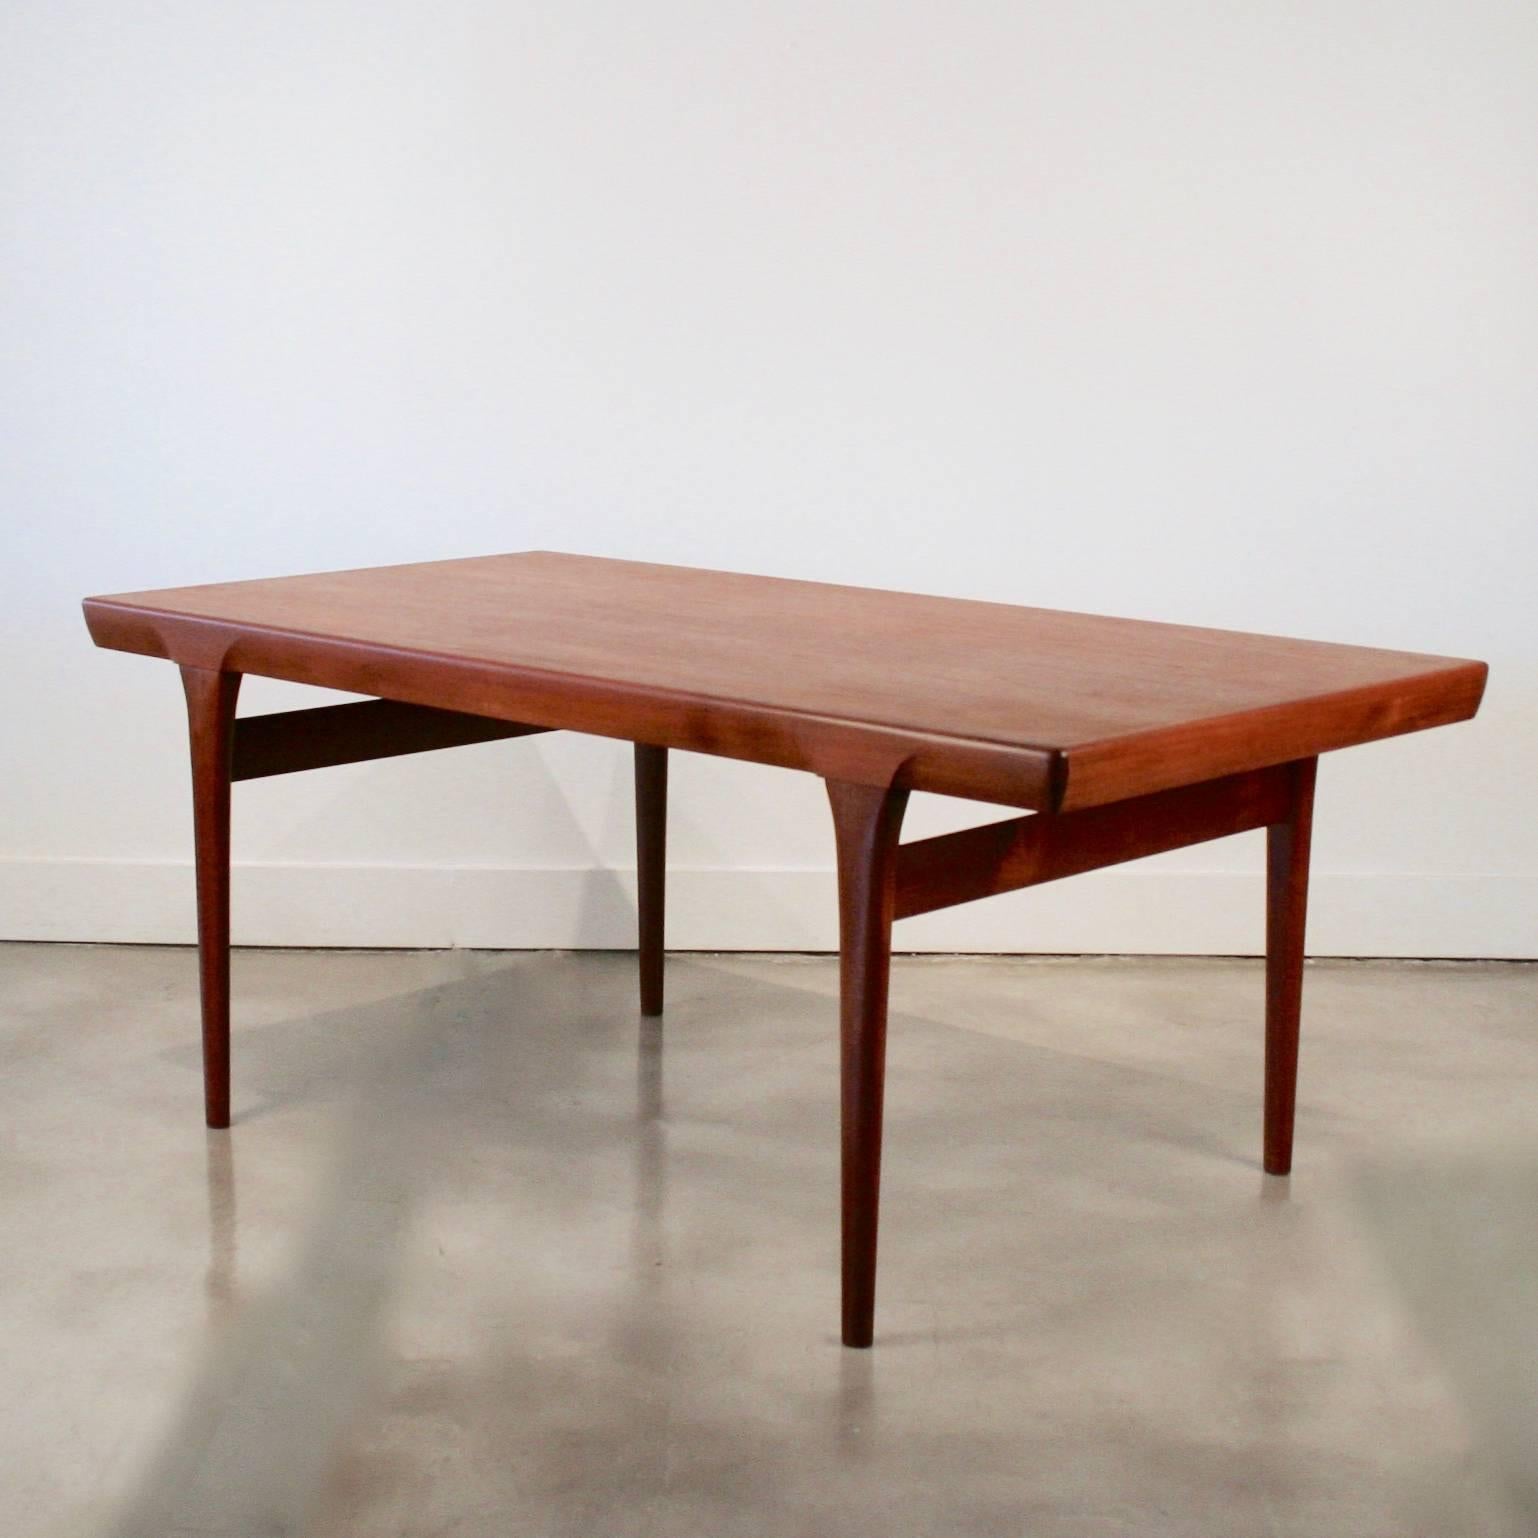 Stunning vintage Danish teak table designed by Kofoed Larson featuring wonderfully crafted leg detail and two leaved stored underneath the table at 14 inches each. Made in Denmark.
     